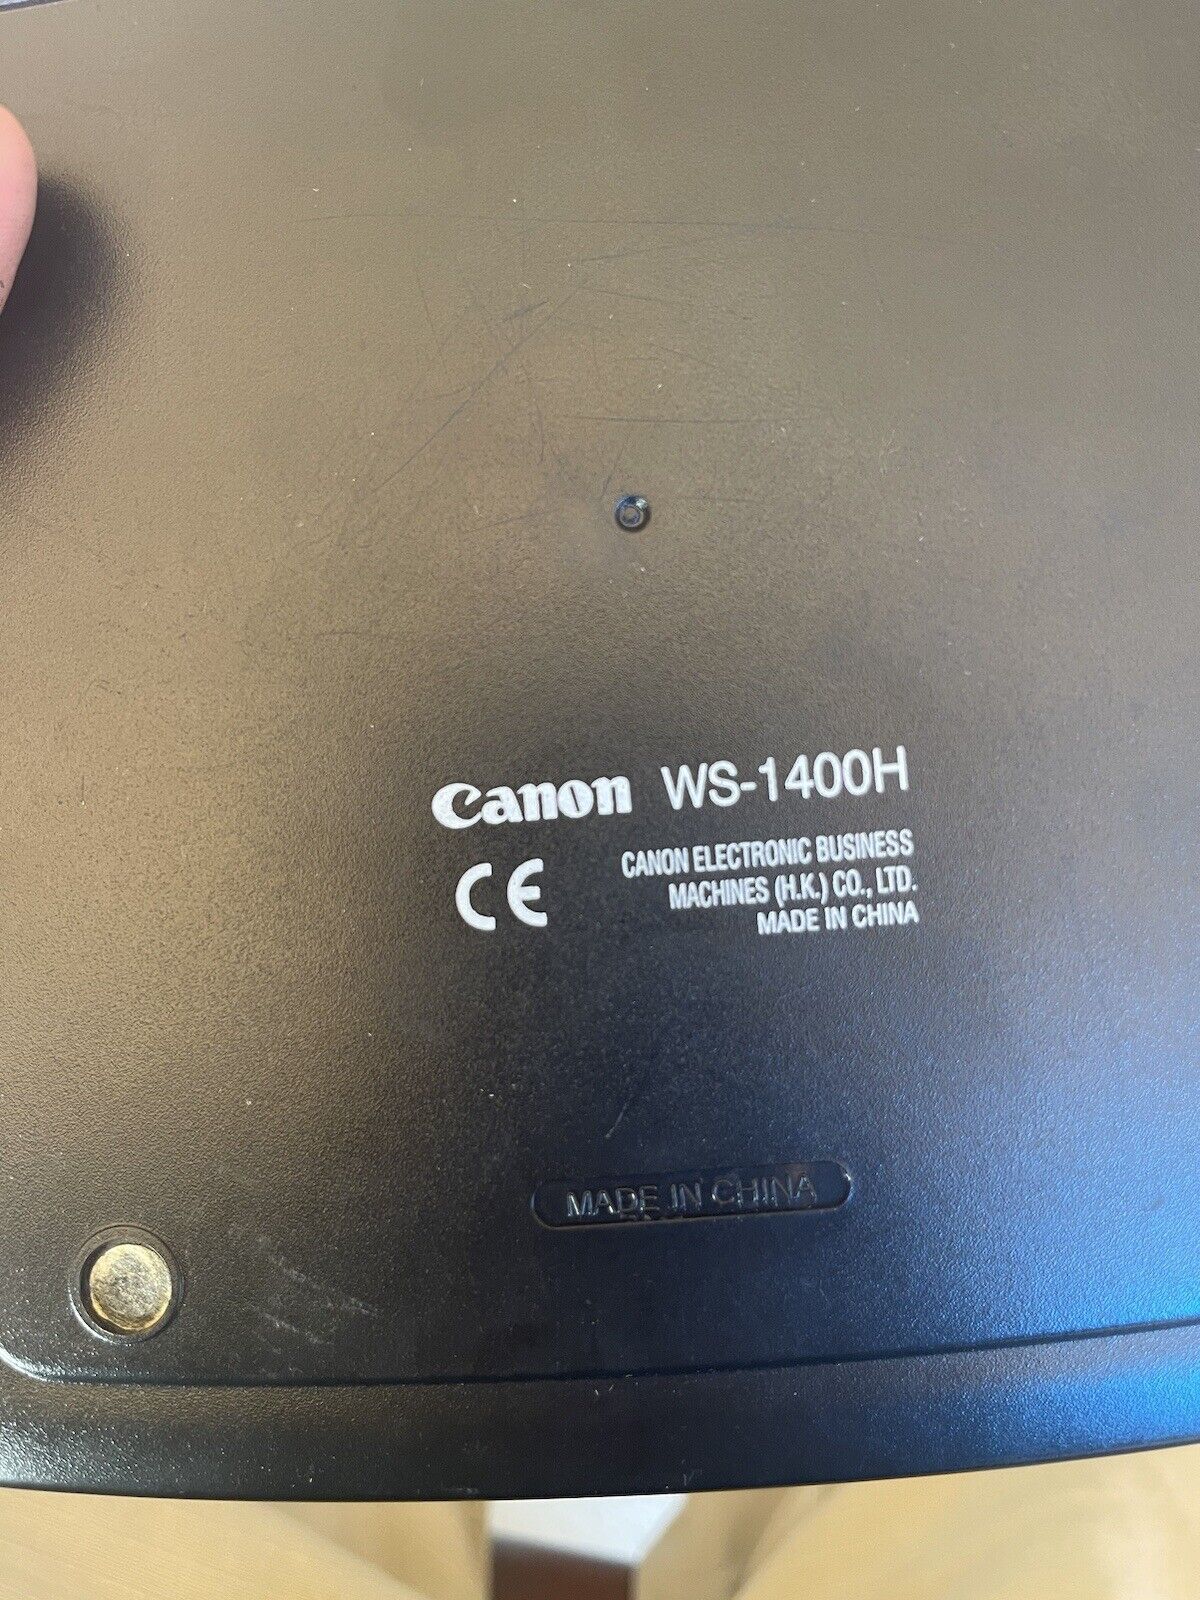 Canon Calculator WS-1400H Dual Power Large buttons